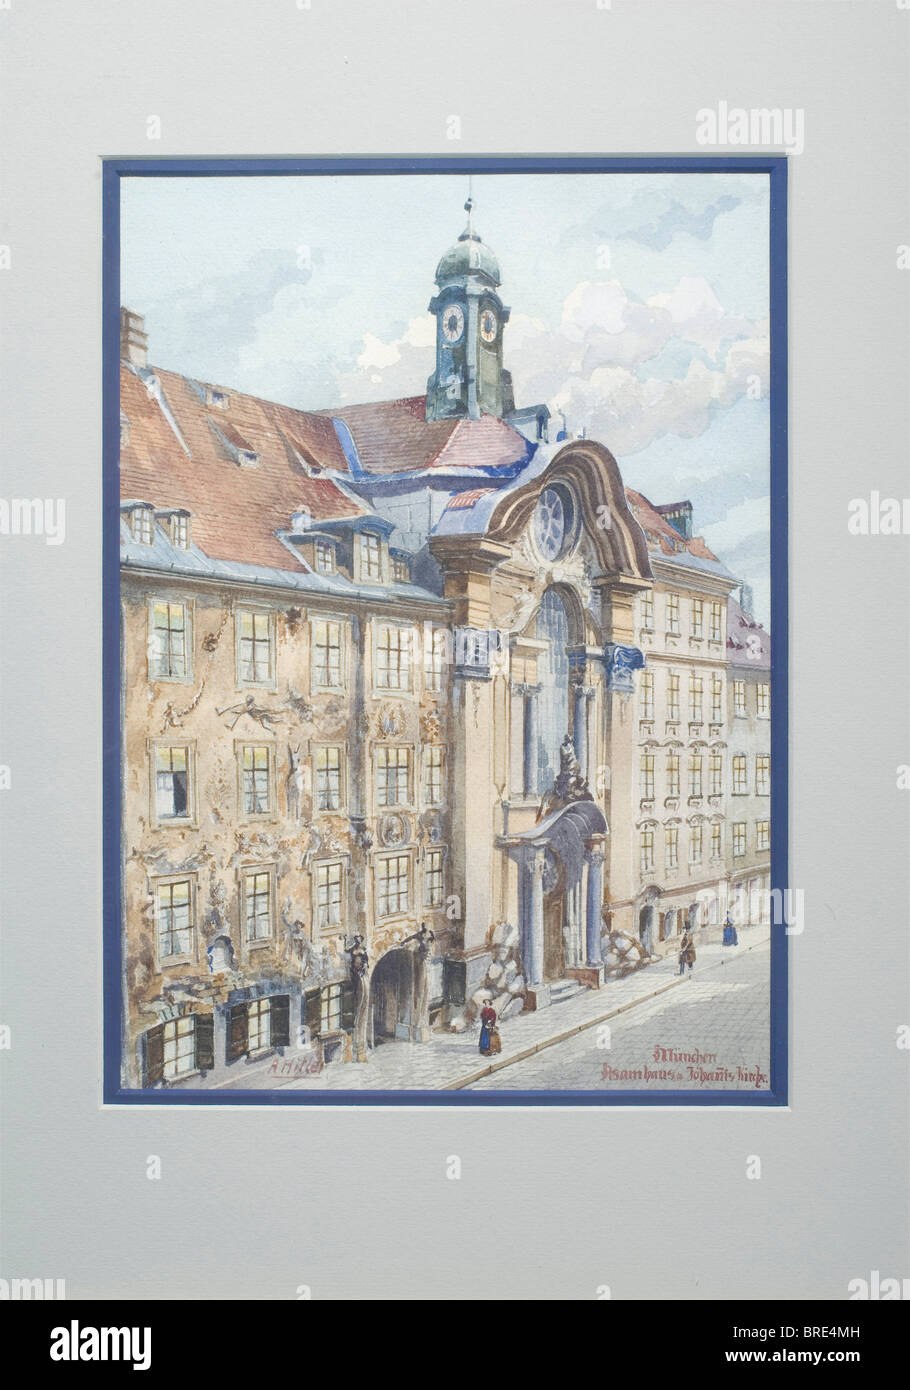 Adolf Hitler, the watercolour 'Asamhaus & Johanis Kirche' Extremely well executed painting on textured watercolour pa fine arts, people, 1910s, 20th century, NS, National Socialism, Nazism, Third Reich, German Reich, Germany, German, National Socialist, Nazi, Nazi period, fascism, fine arts, art, art object, art objects, artful, precious, collectible, collector's item, collectibles, collector's items, rarity, rarities, Artist's Copyright has not to be cleared Stock Photo